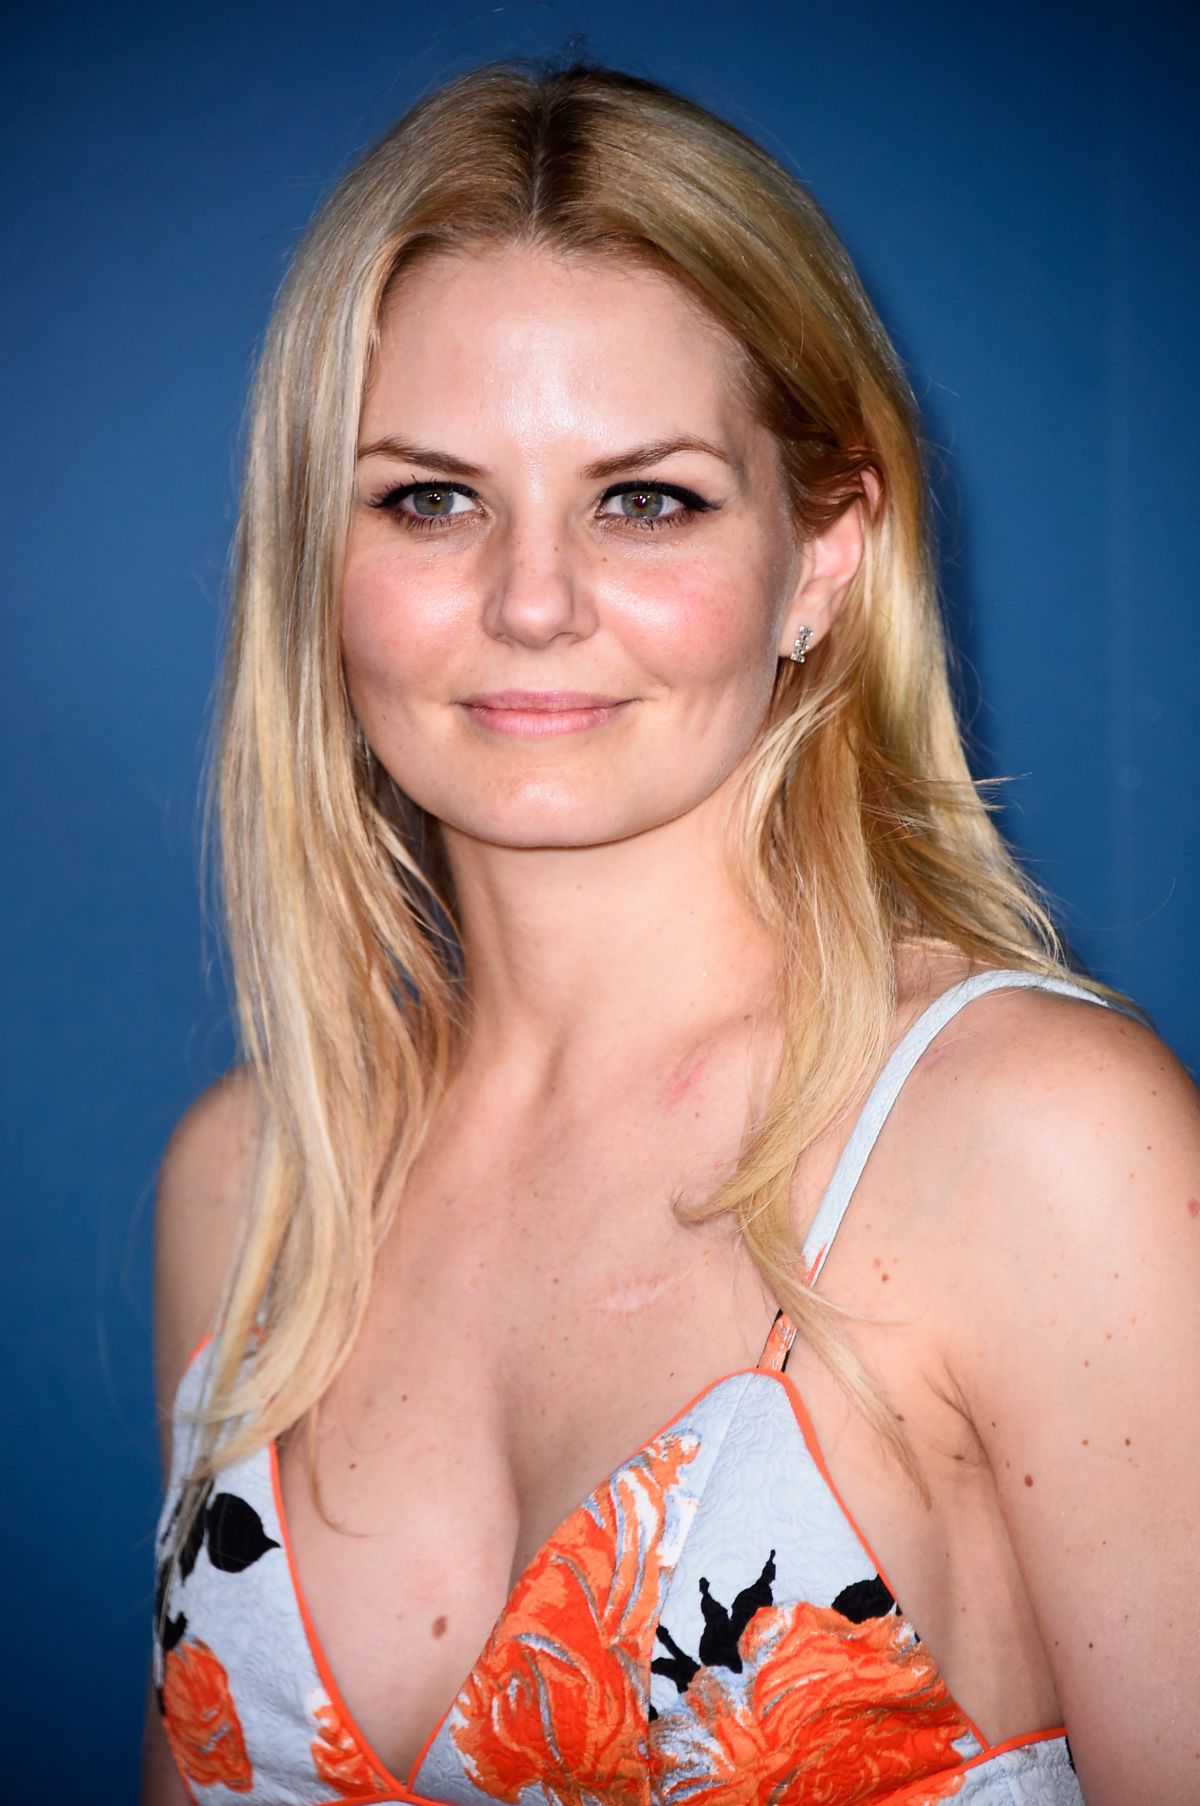 http://www.hawtcelebs.com/wp-content/uploads/2014/07/jennifer-morrison-at-playboy-party-at-comic-con-in-san-diego_1.jpg